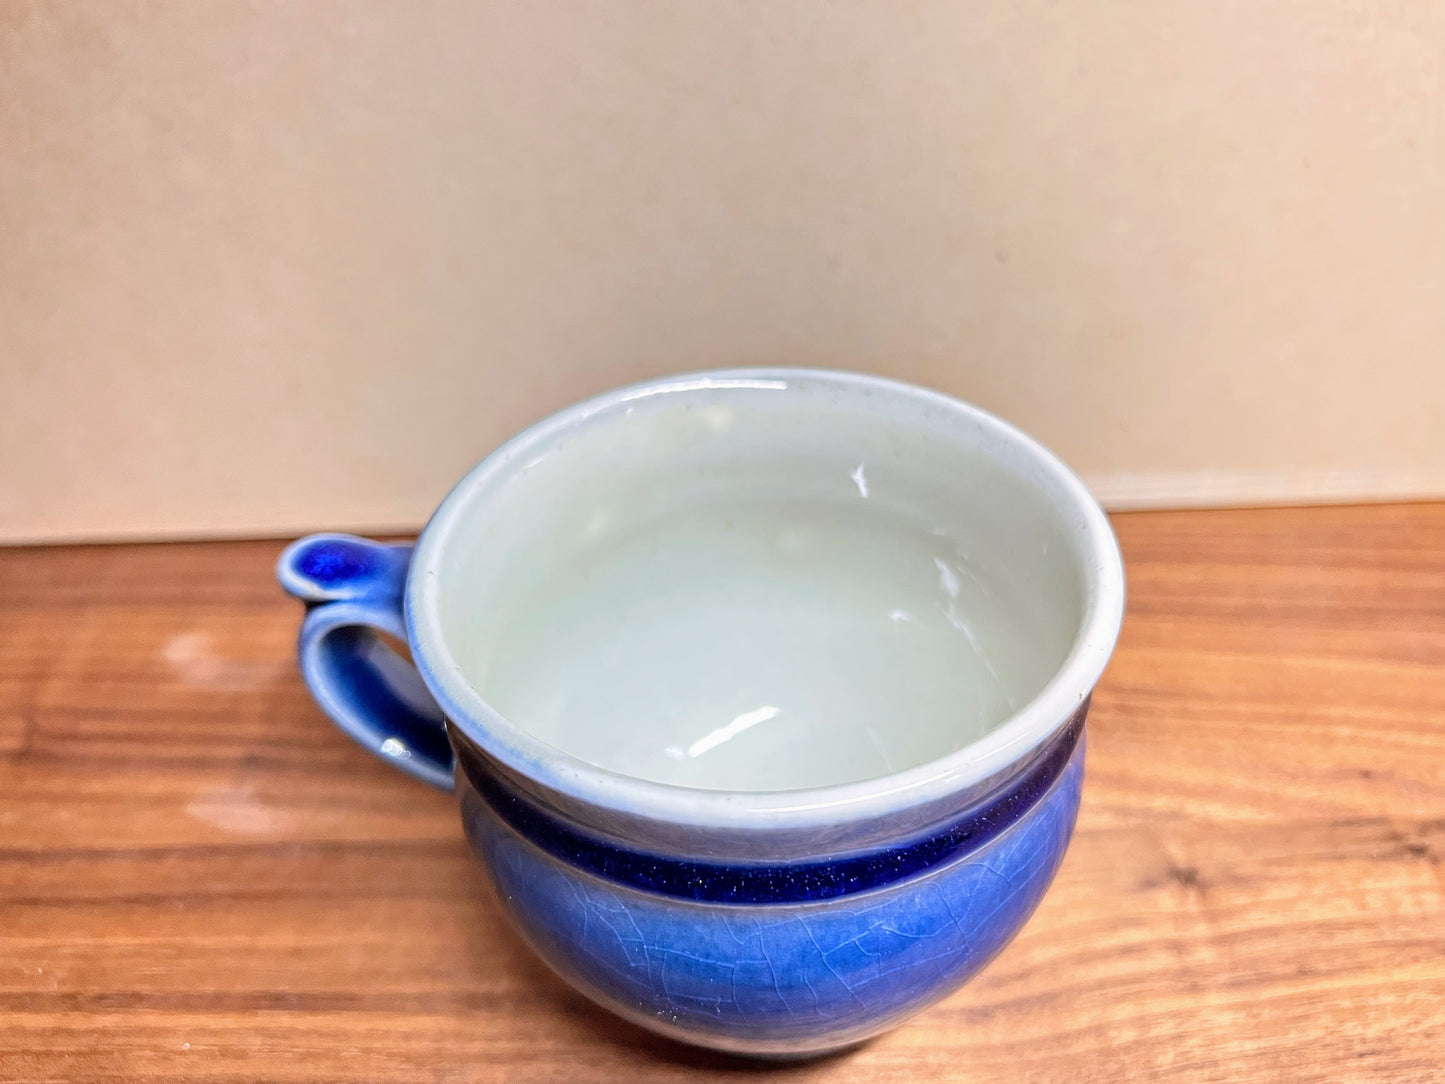 Shusaigama "Morning Cup" Blue